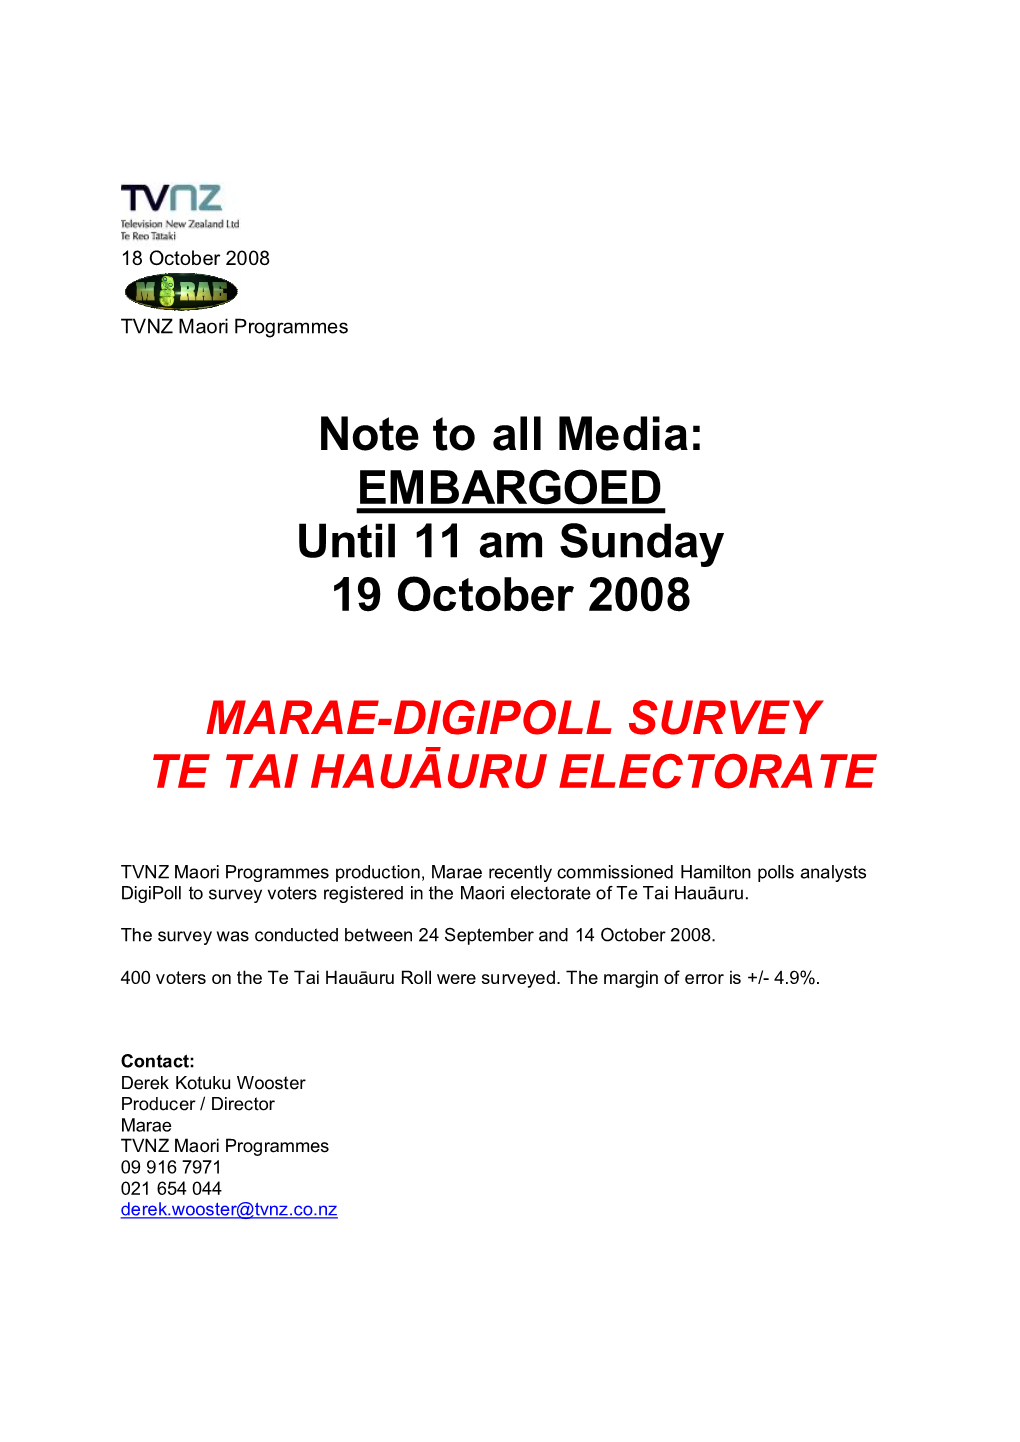 Note to All Media: EMBARGOED Until 11 Am Sunday 19 October 2008